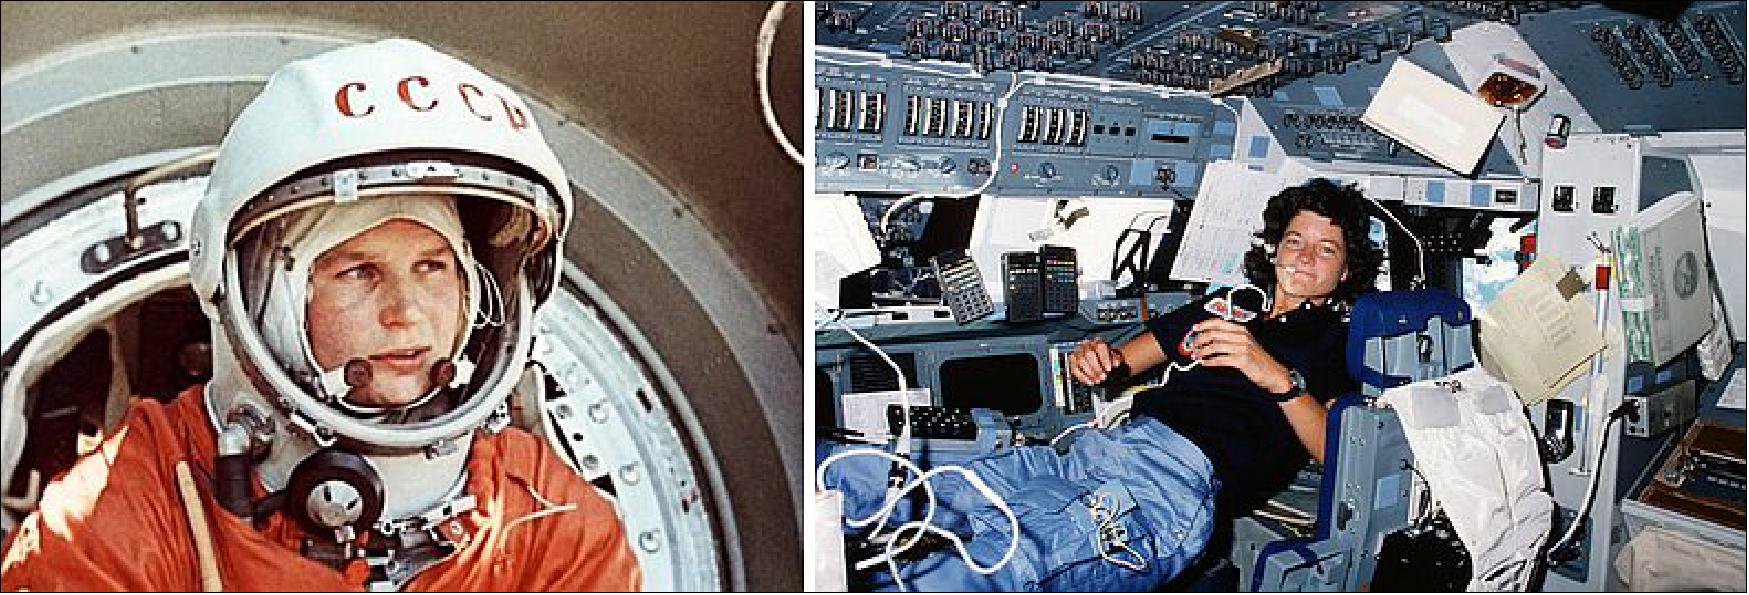 Figure 93: Left: Tereshkova just before boarding her Vostok 6 capsule. Right: Sally Ride aboard the Space Shuttle Challenger during the STS-7 mission (image credit: NASA/JSC)